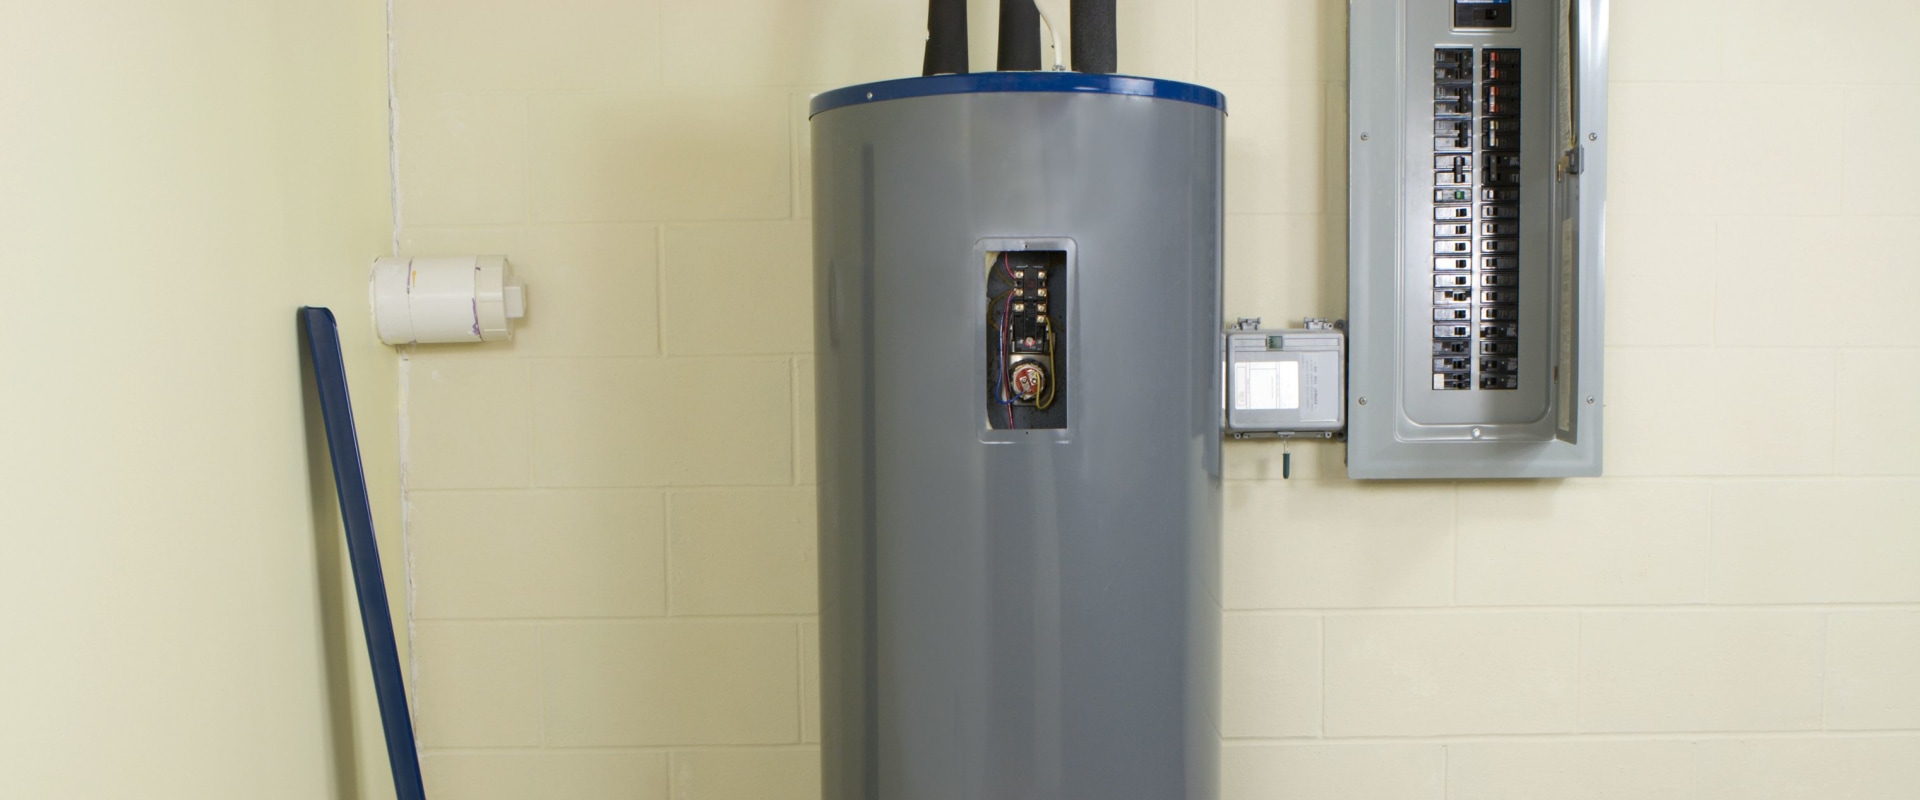 Understanding the California Plumbing Code for Water Heater Expansion Tanks